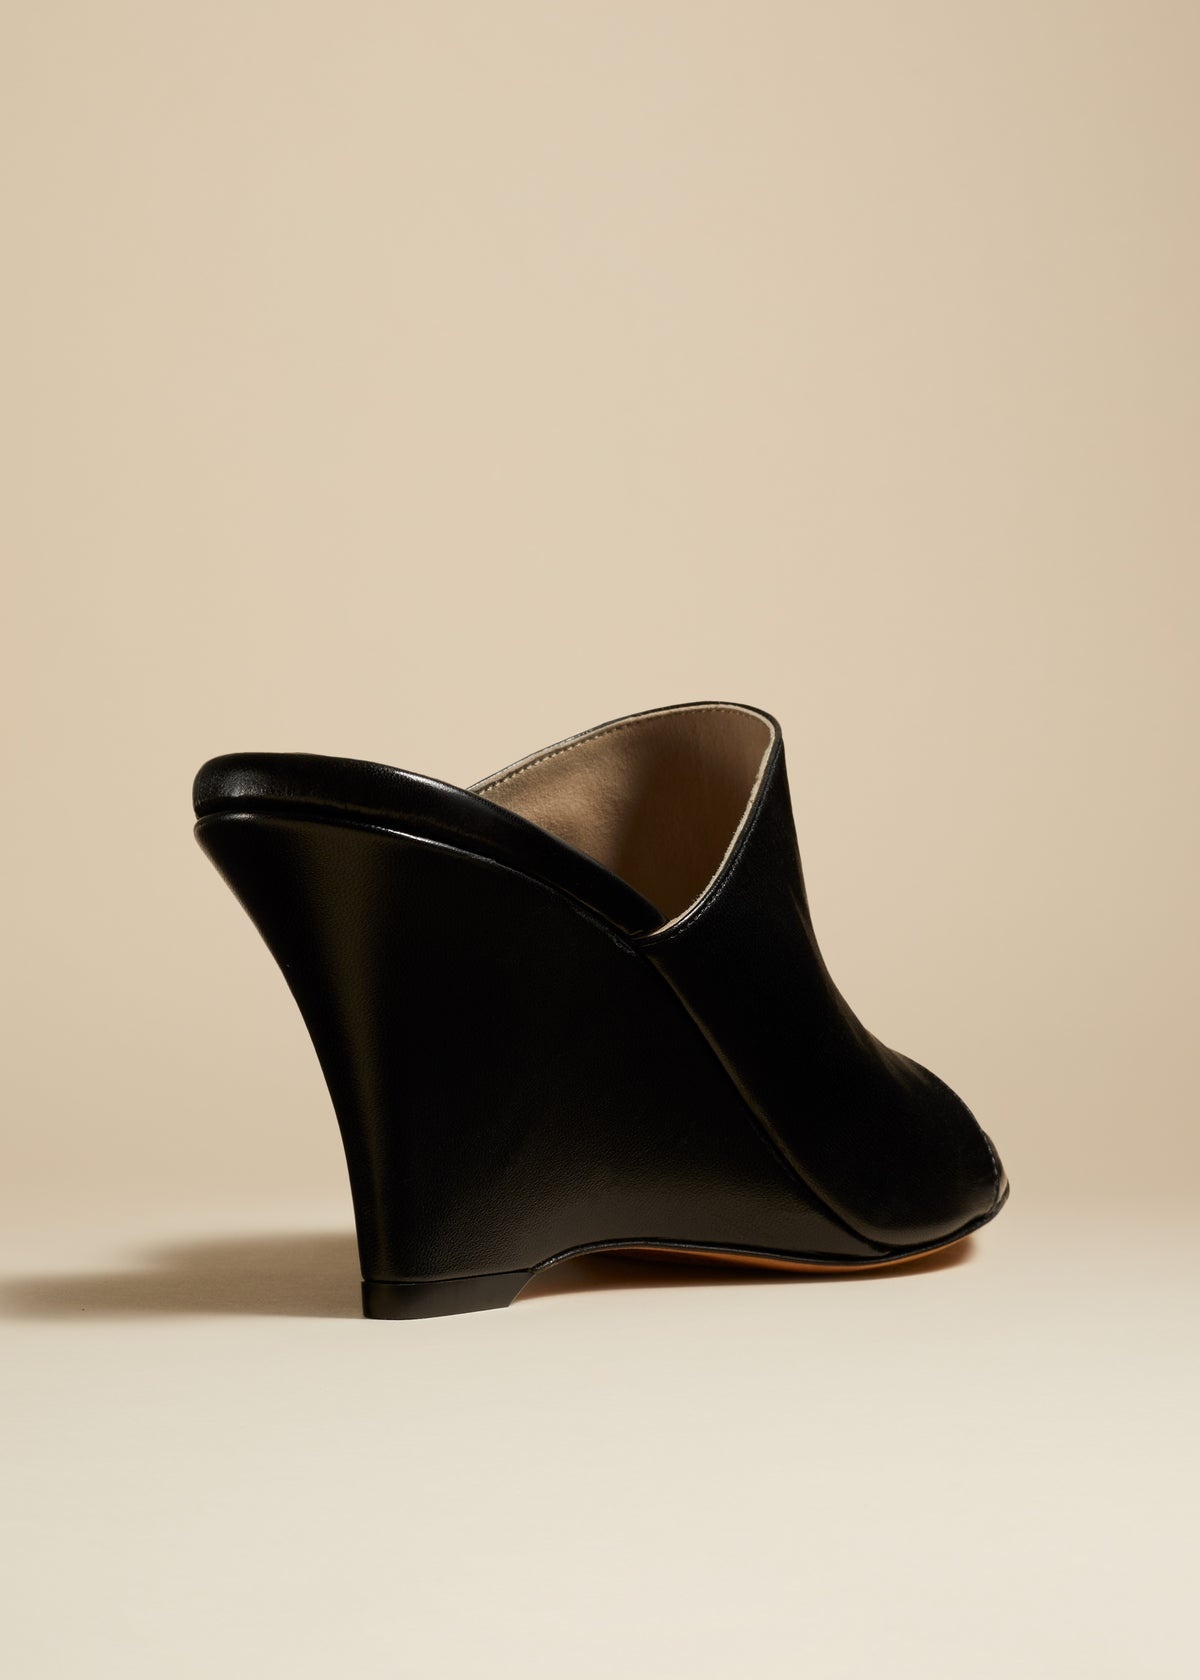 The Marion Wedge Sandal in Black Leather - 3